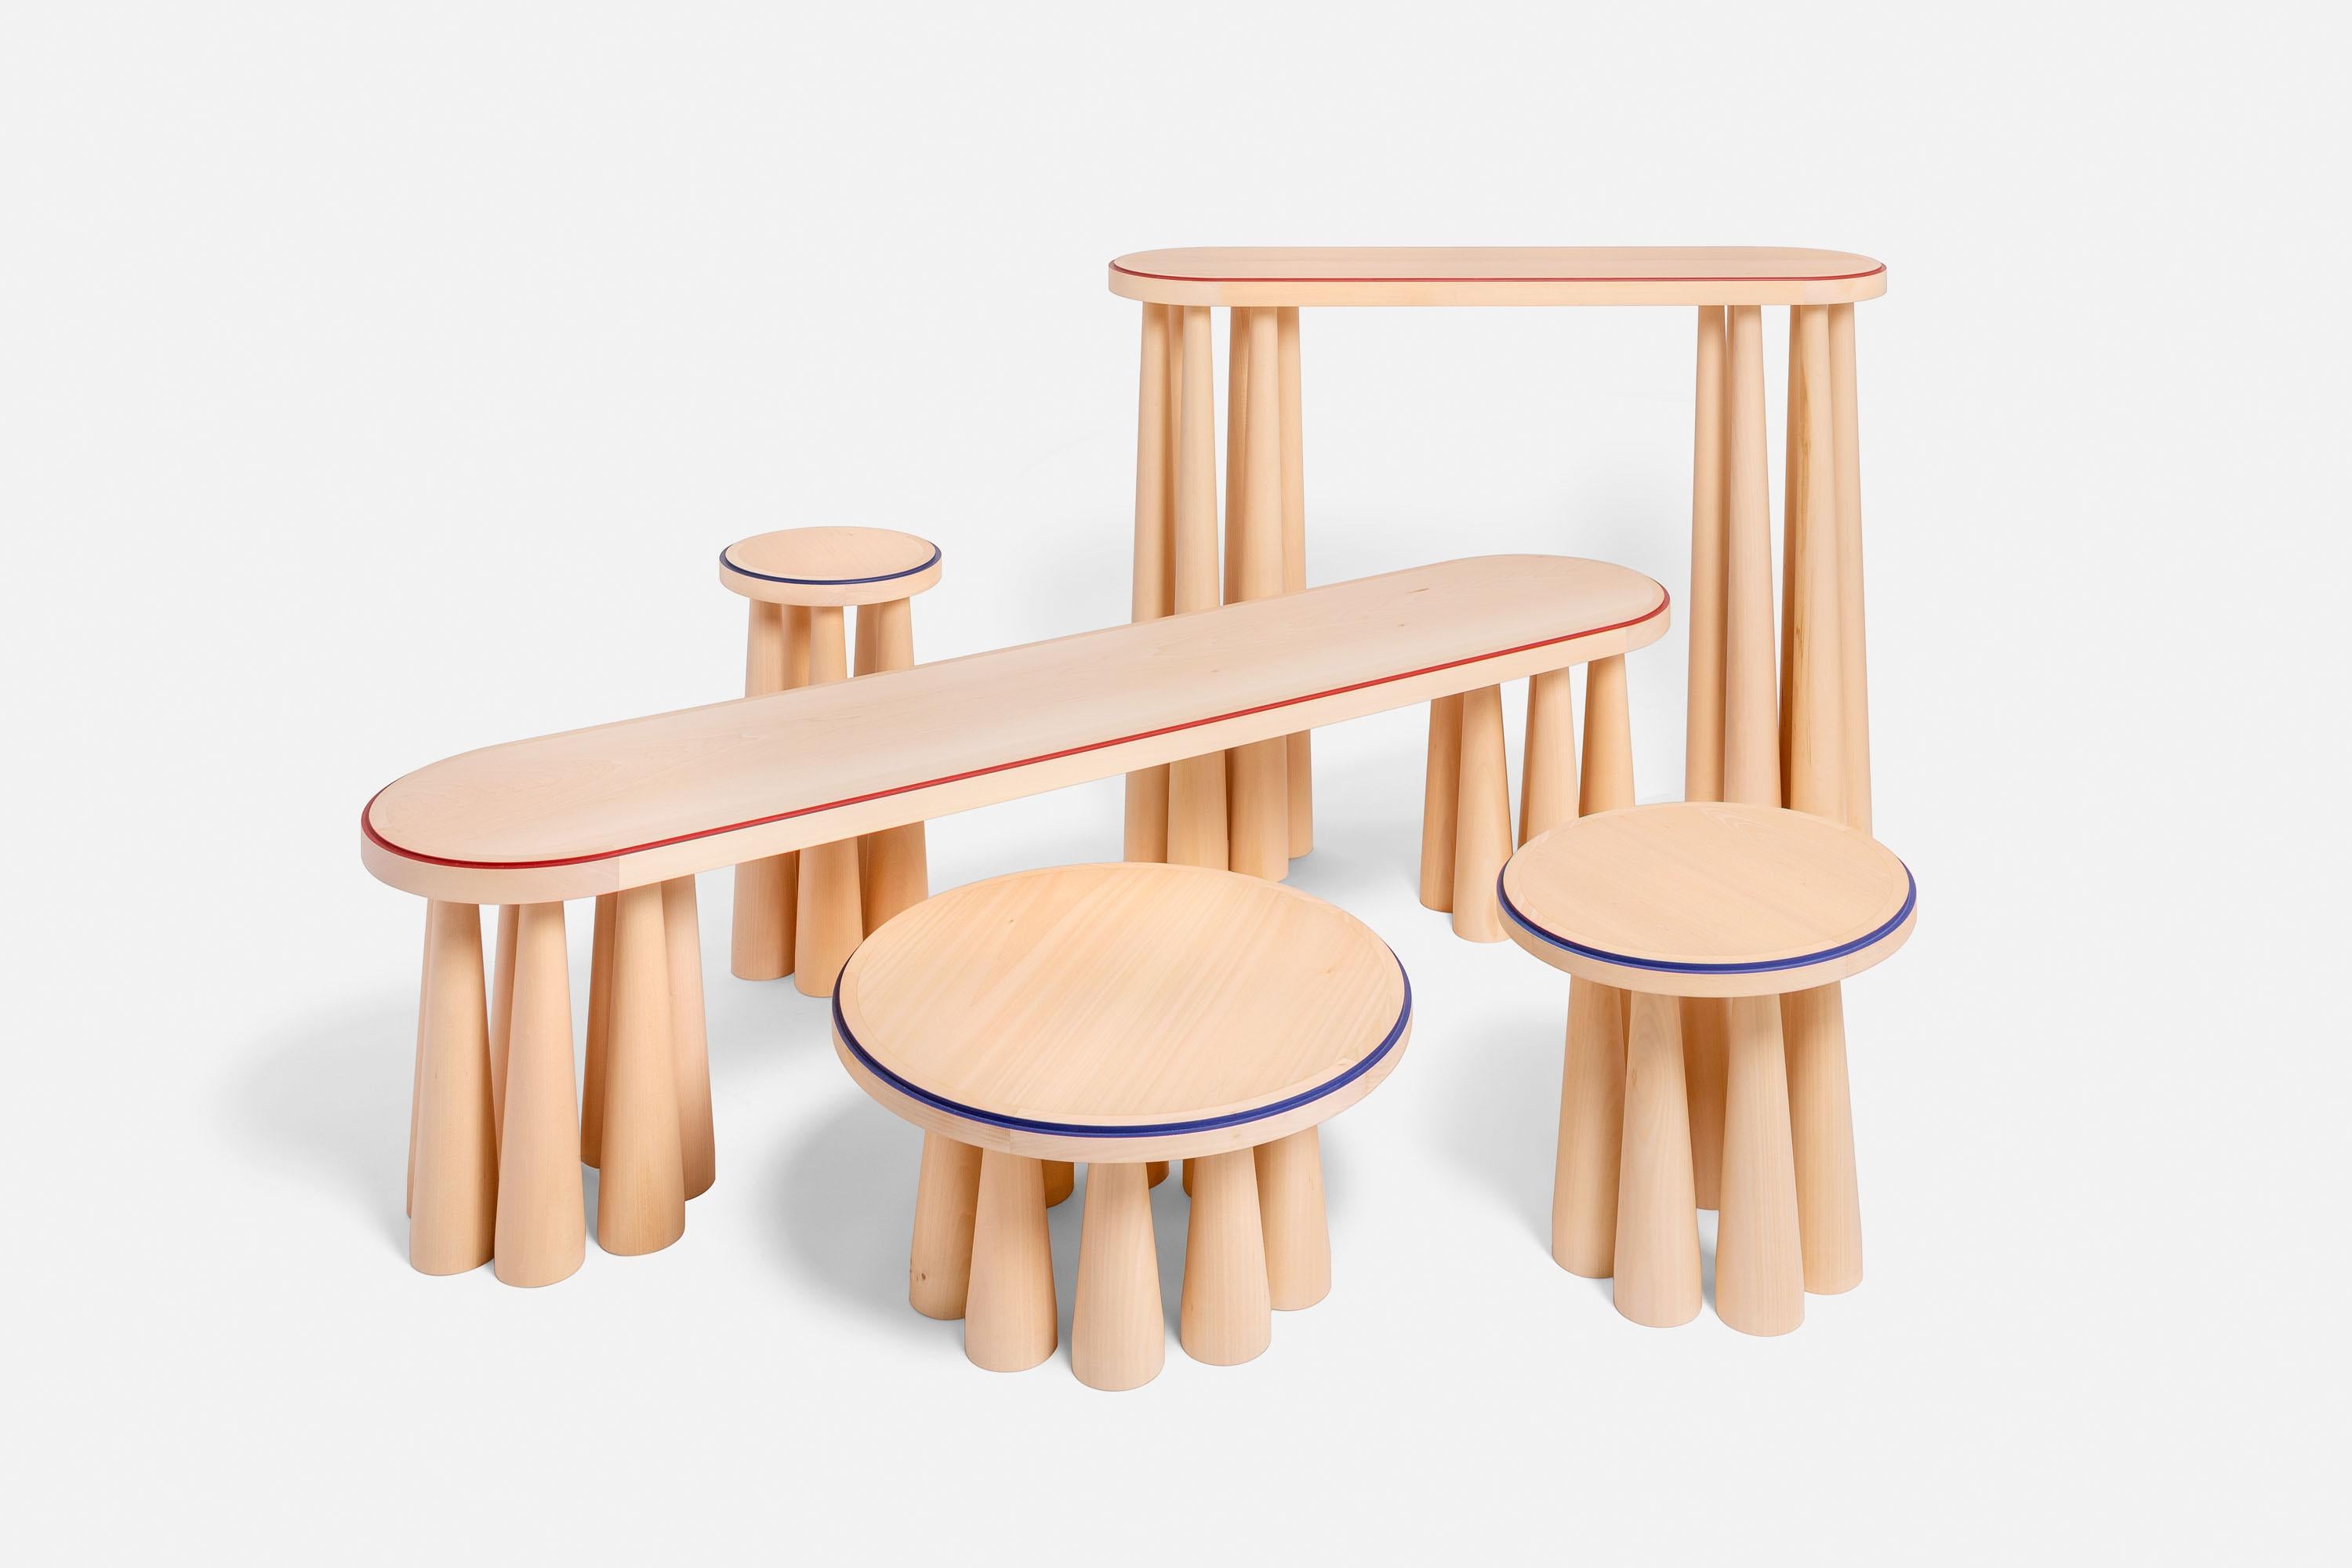 Bogdan bench by Studio Intervallo.
Dimensions: W 180 x D 40 x H 46 cm.
Materials: LINDEN solid wood, with colored decoration on the circumference.

Other types of wood available on request.

The Bogdan collection is born from a single trunk of